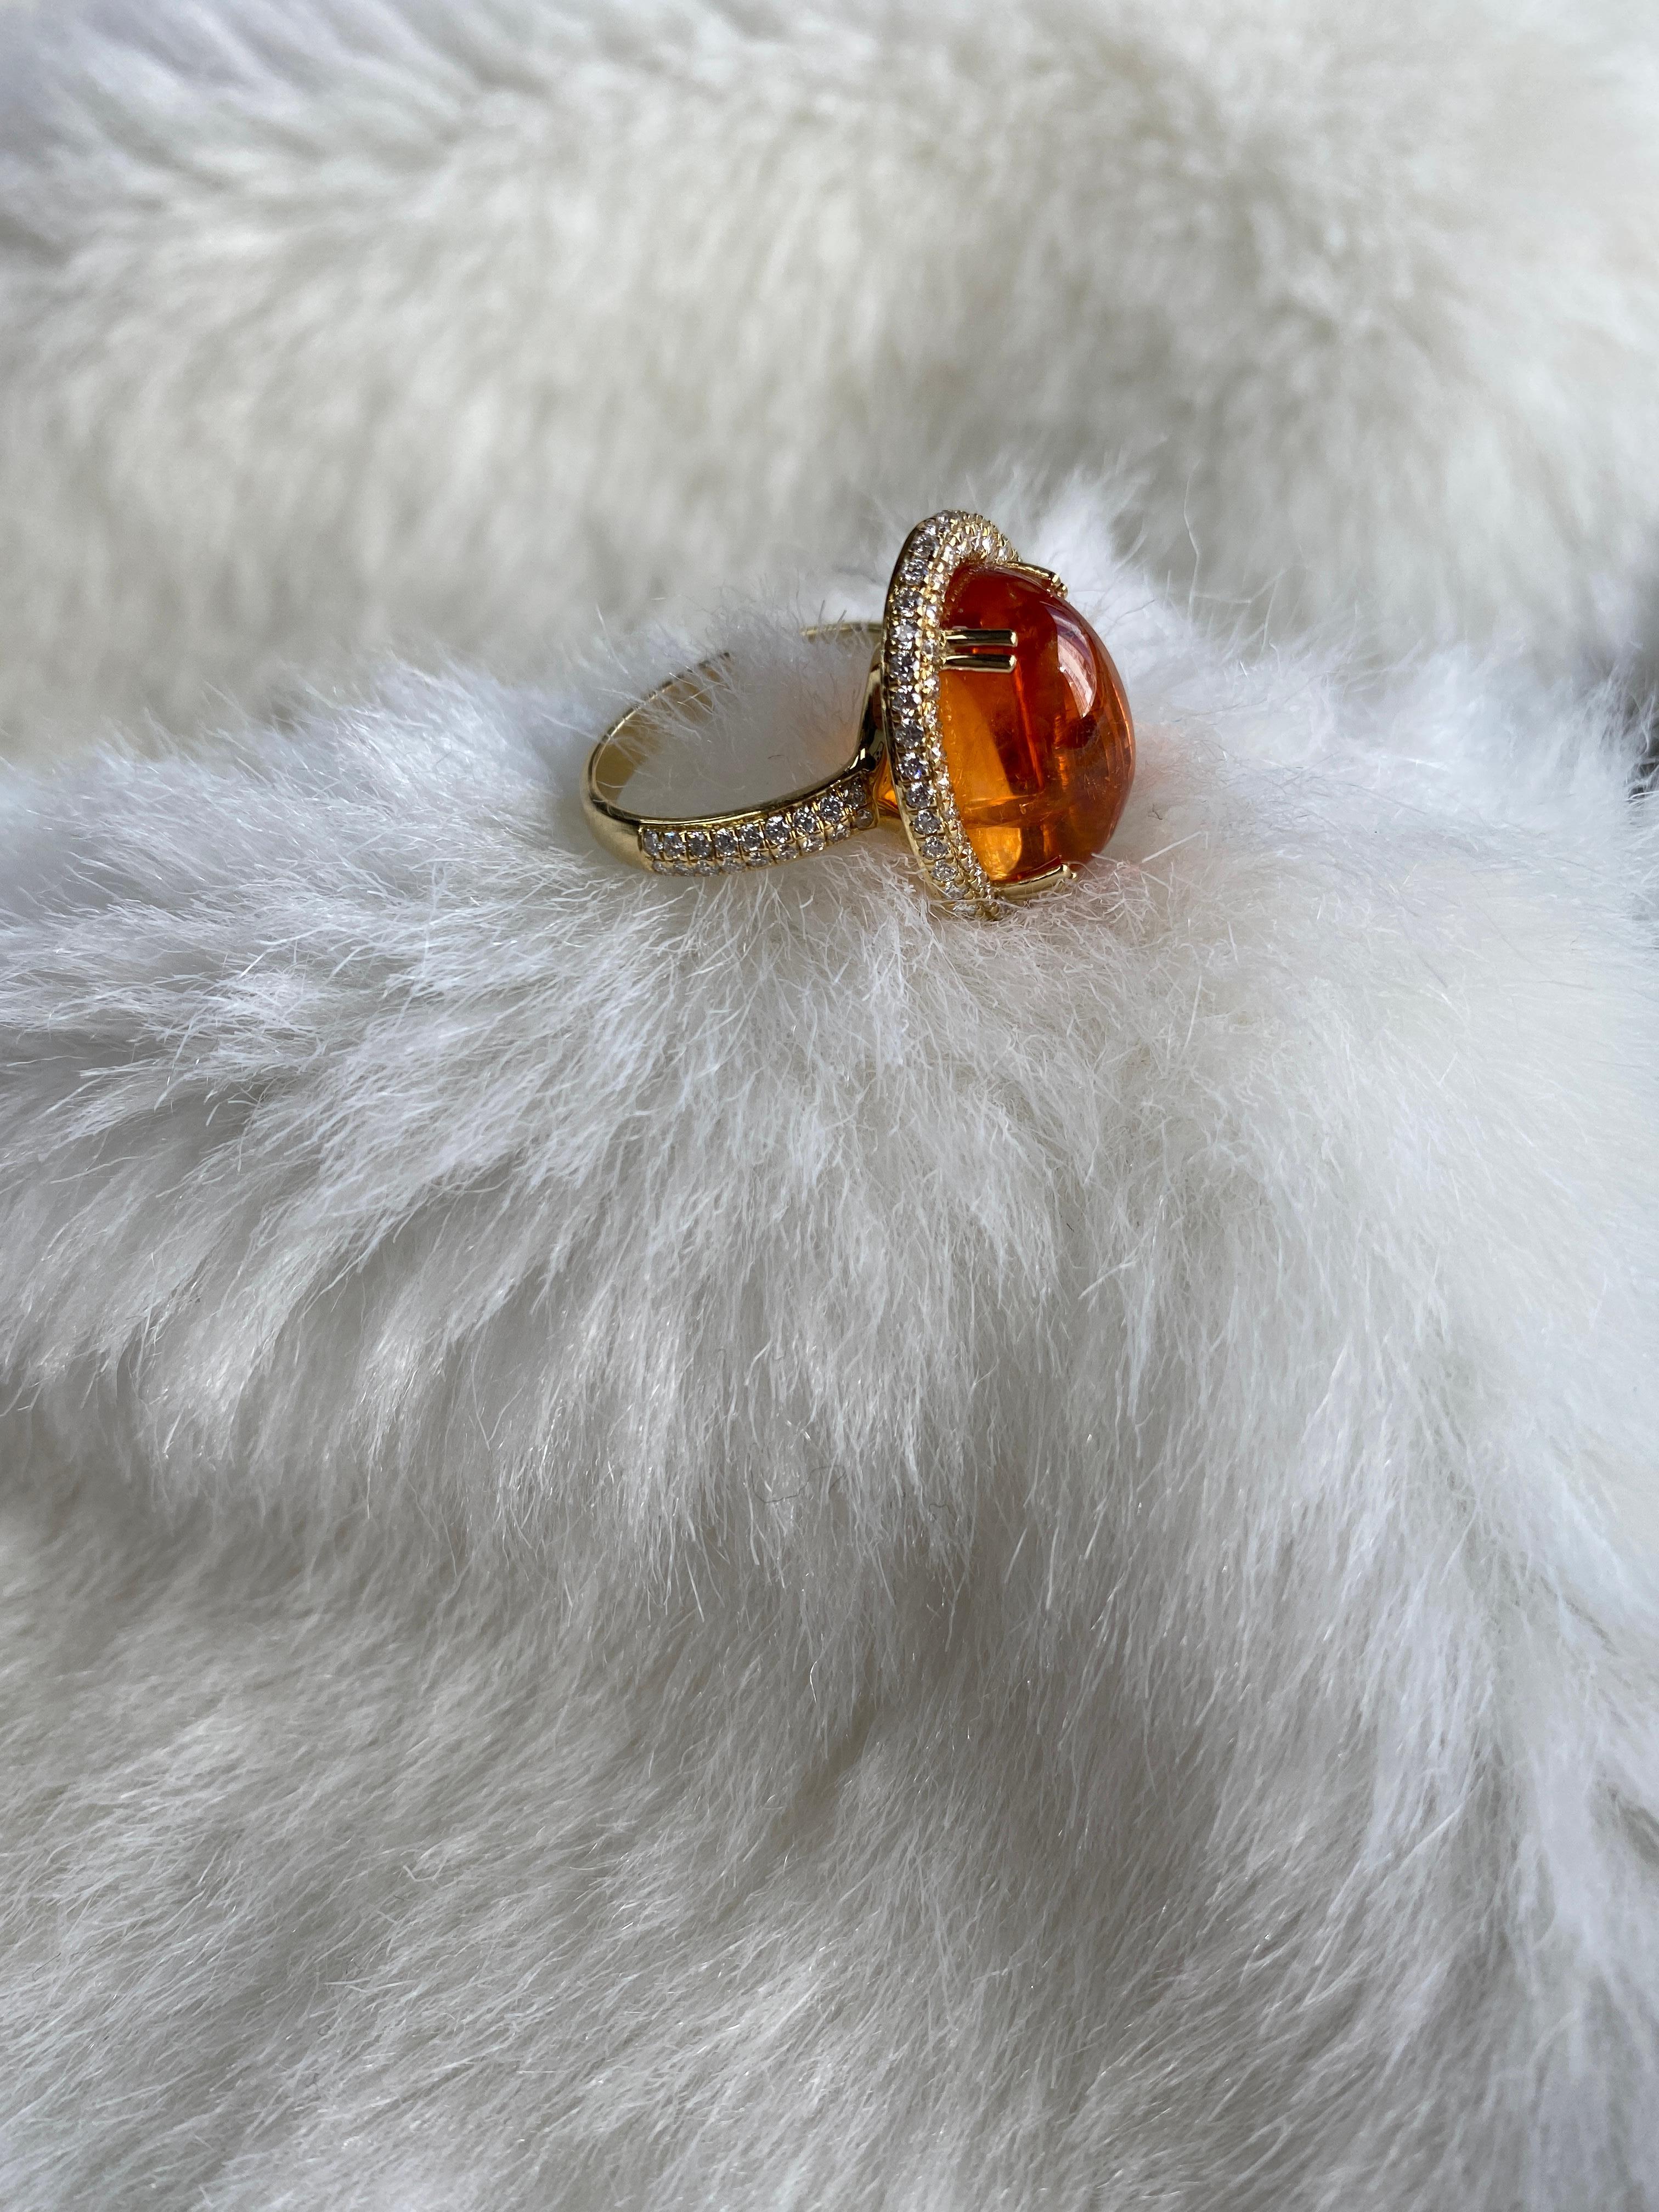 Mandarine Garnet Ring with Diamonds in 18K Yellow Gold, from 'G-One' Collection. This ring is so unique and marvelous that you will dazzle even more with it. If you are looking to add an special piece to your collection, this will be the perfect